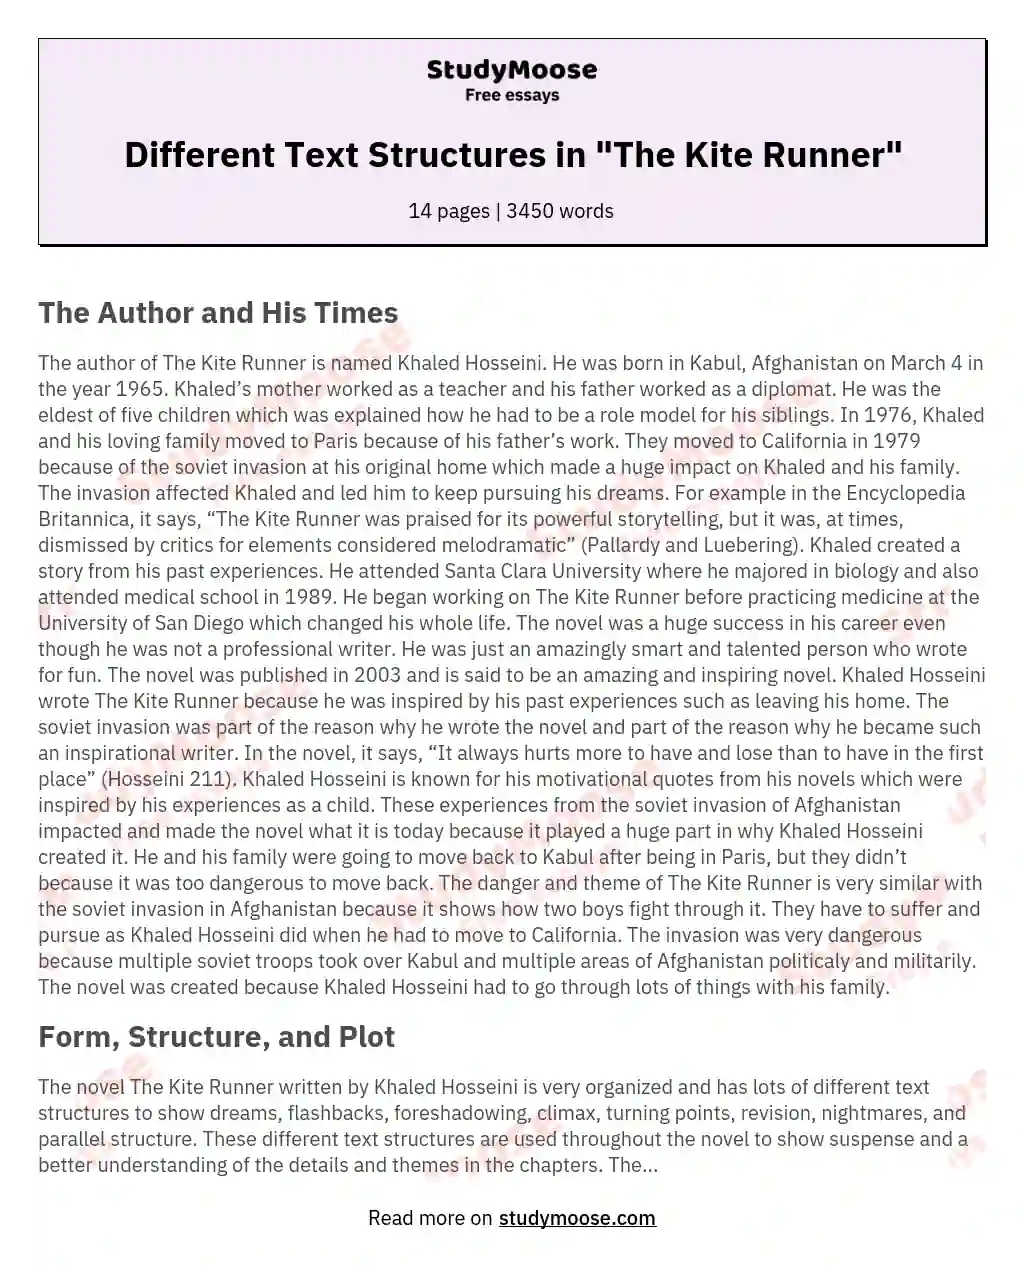 Different Text Structures in "The Kite Runner" essay